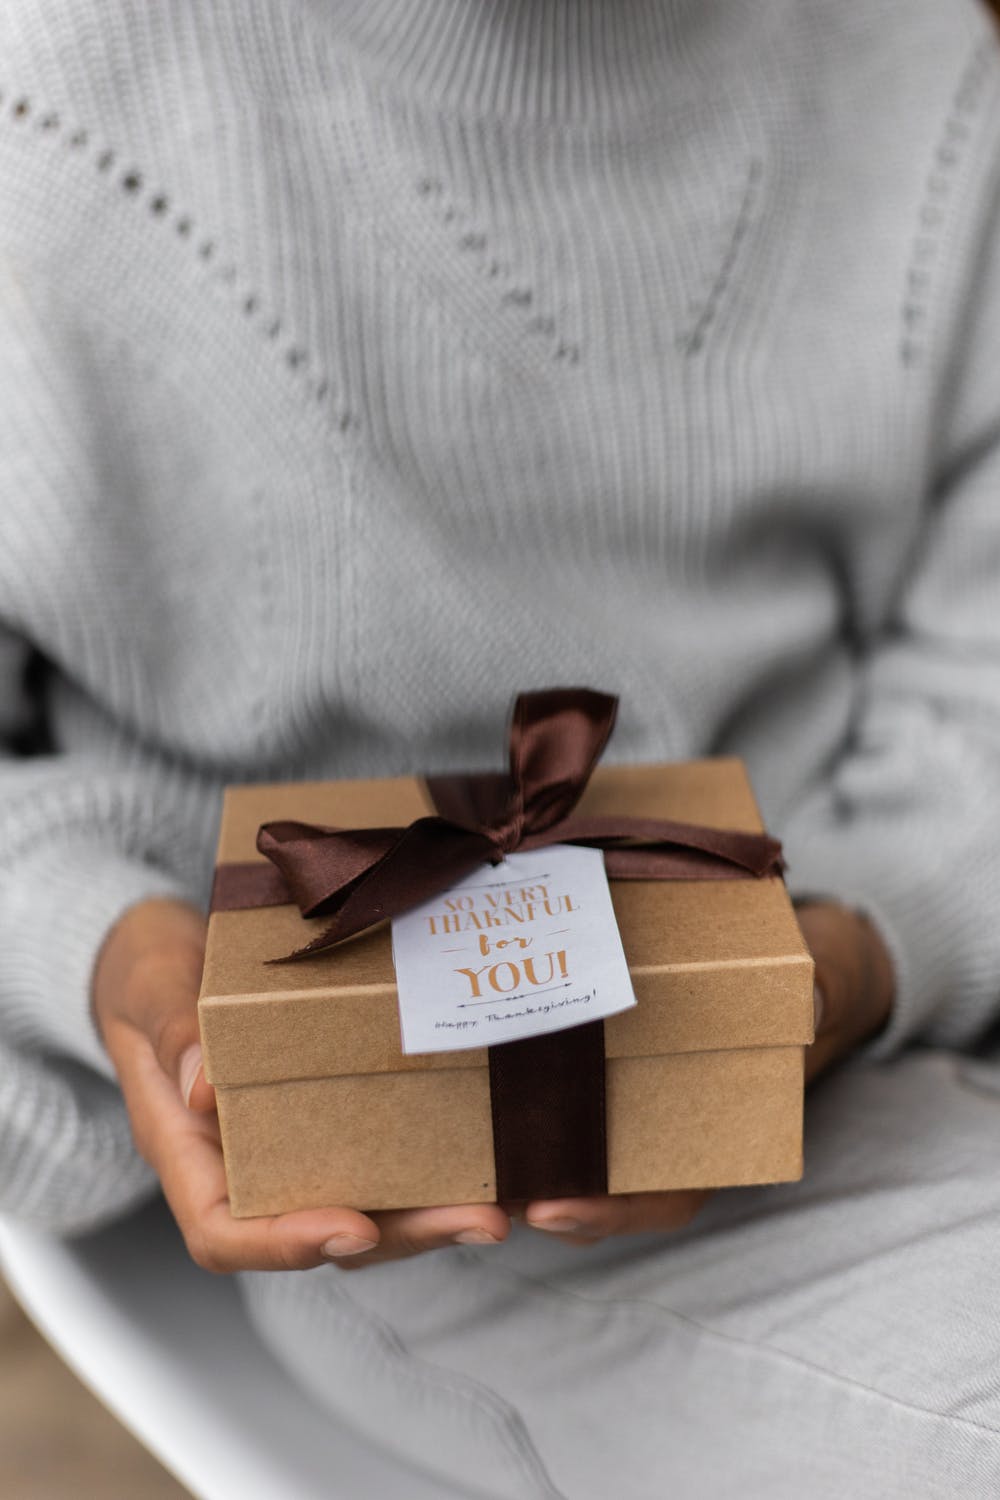 Anna decided to deliver the gift in person | Source: Pexels